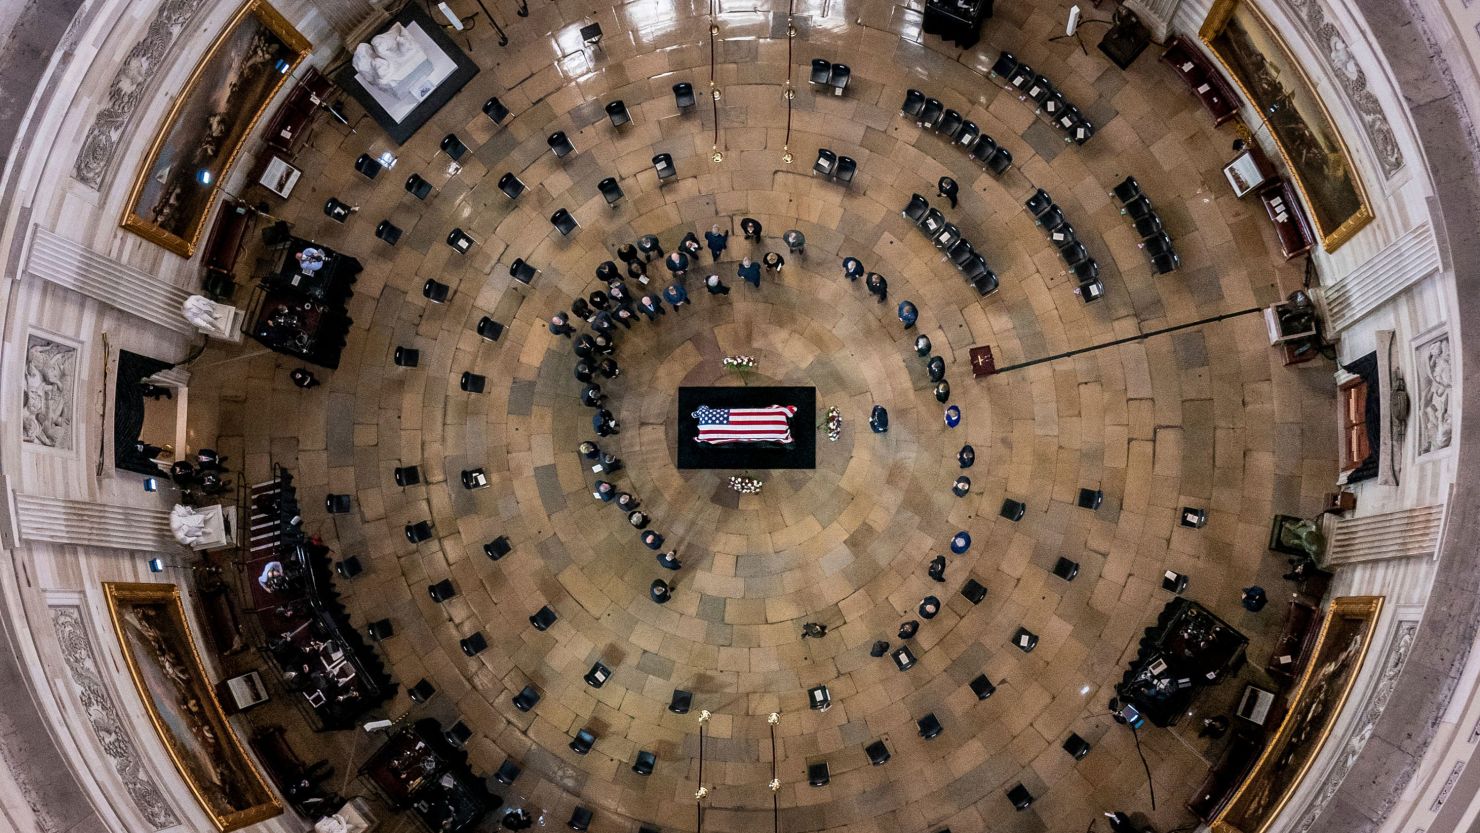 Members of Congress surround the casket of former Senate Majority Leader Harry Reid of Nevada as he lies in state in the Rotunda of the US Capitol on Wednesday.